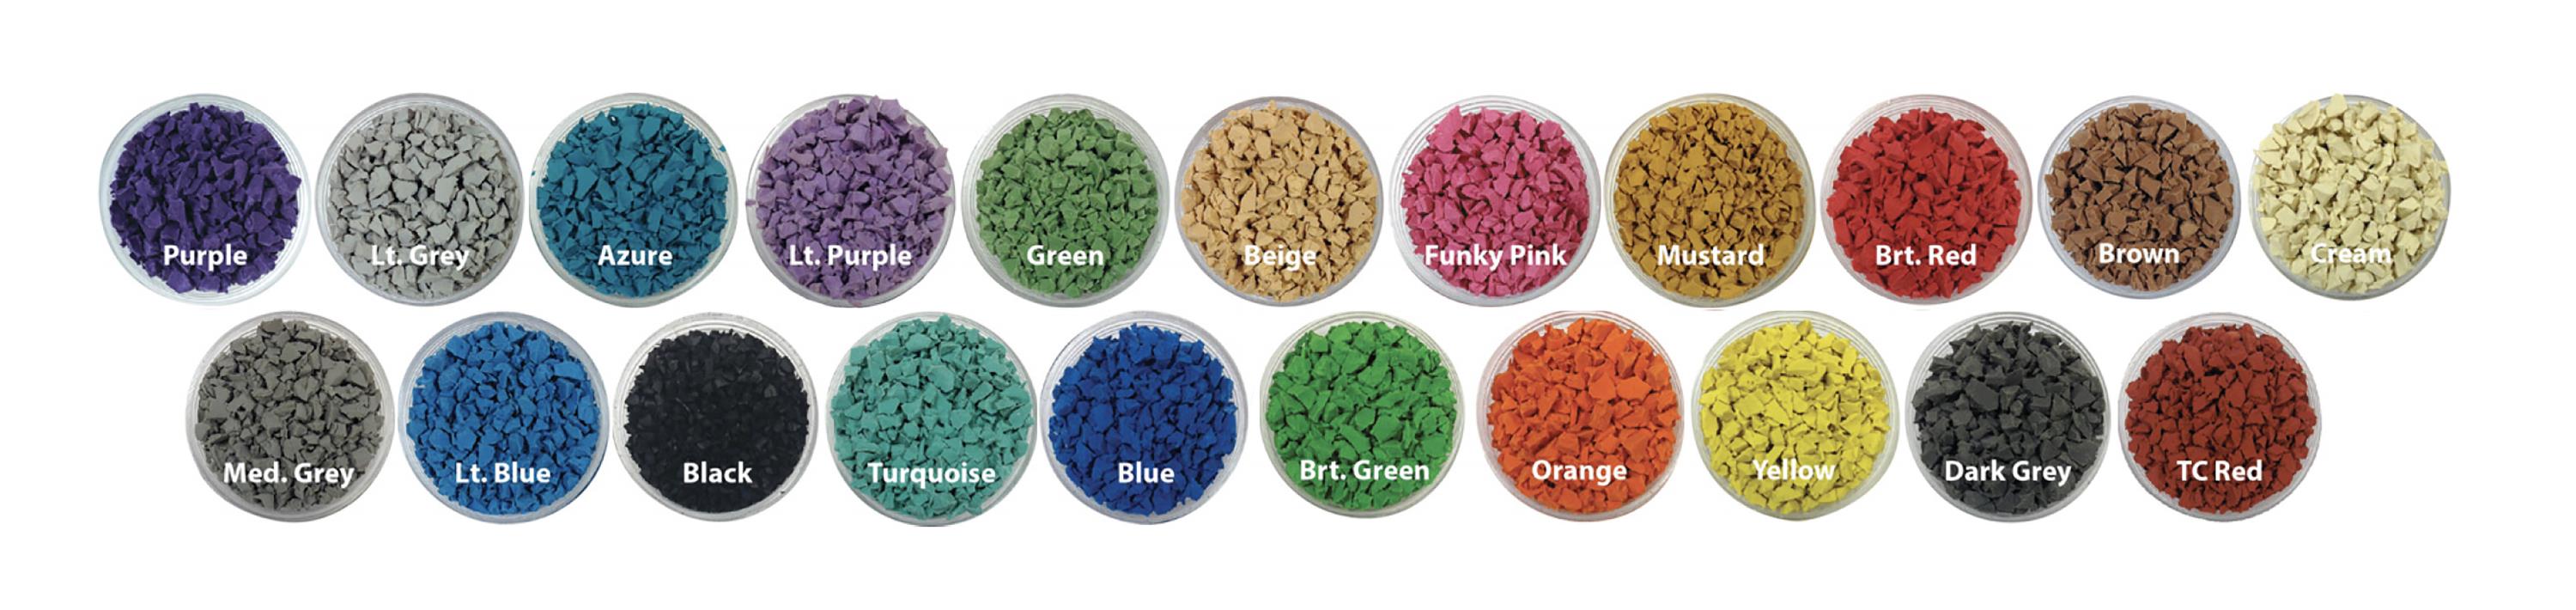 UNITY Pavers - TPV Color Chip Choices to be Blended as Desired